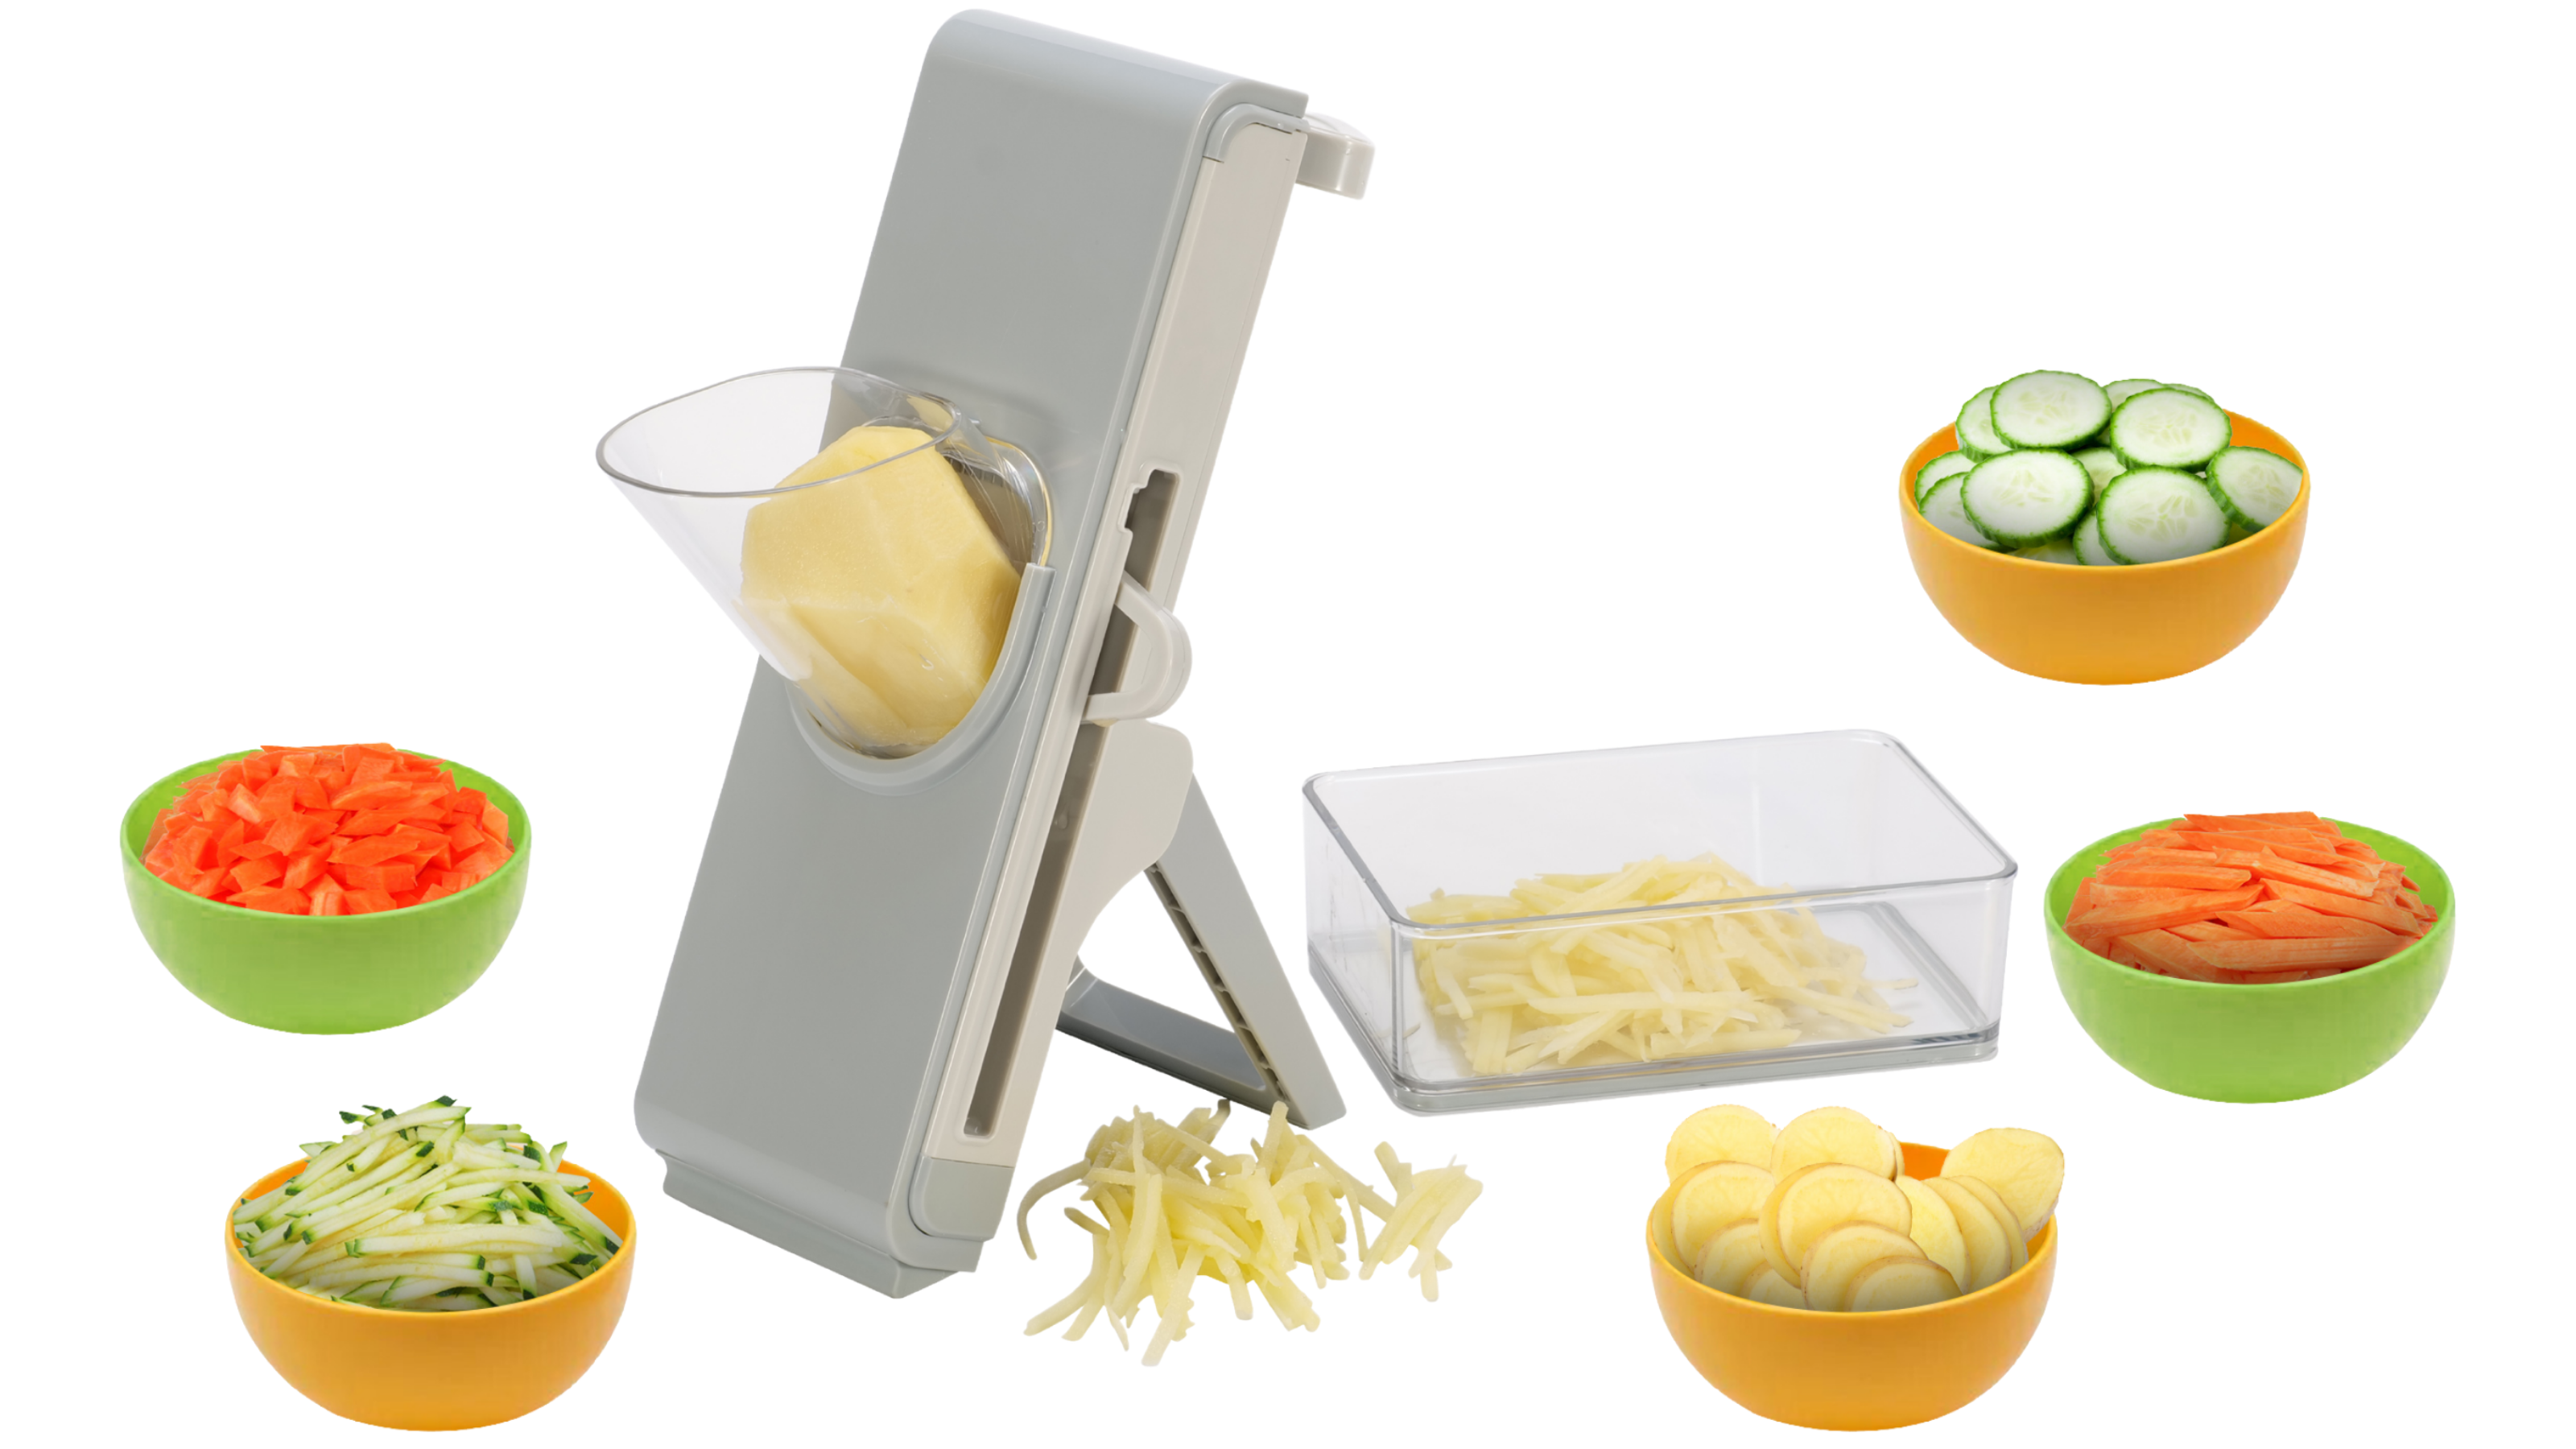 Brieftons QuickPush Food Chopper: Vegetable Chopper Dicer Slicer, Onion  Chopper Vegetable Cutter, 3 Extra-Large Blades with 200% More Cutting Area  to